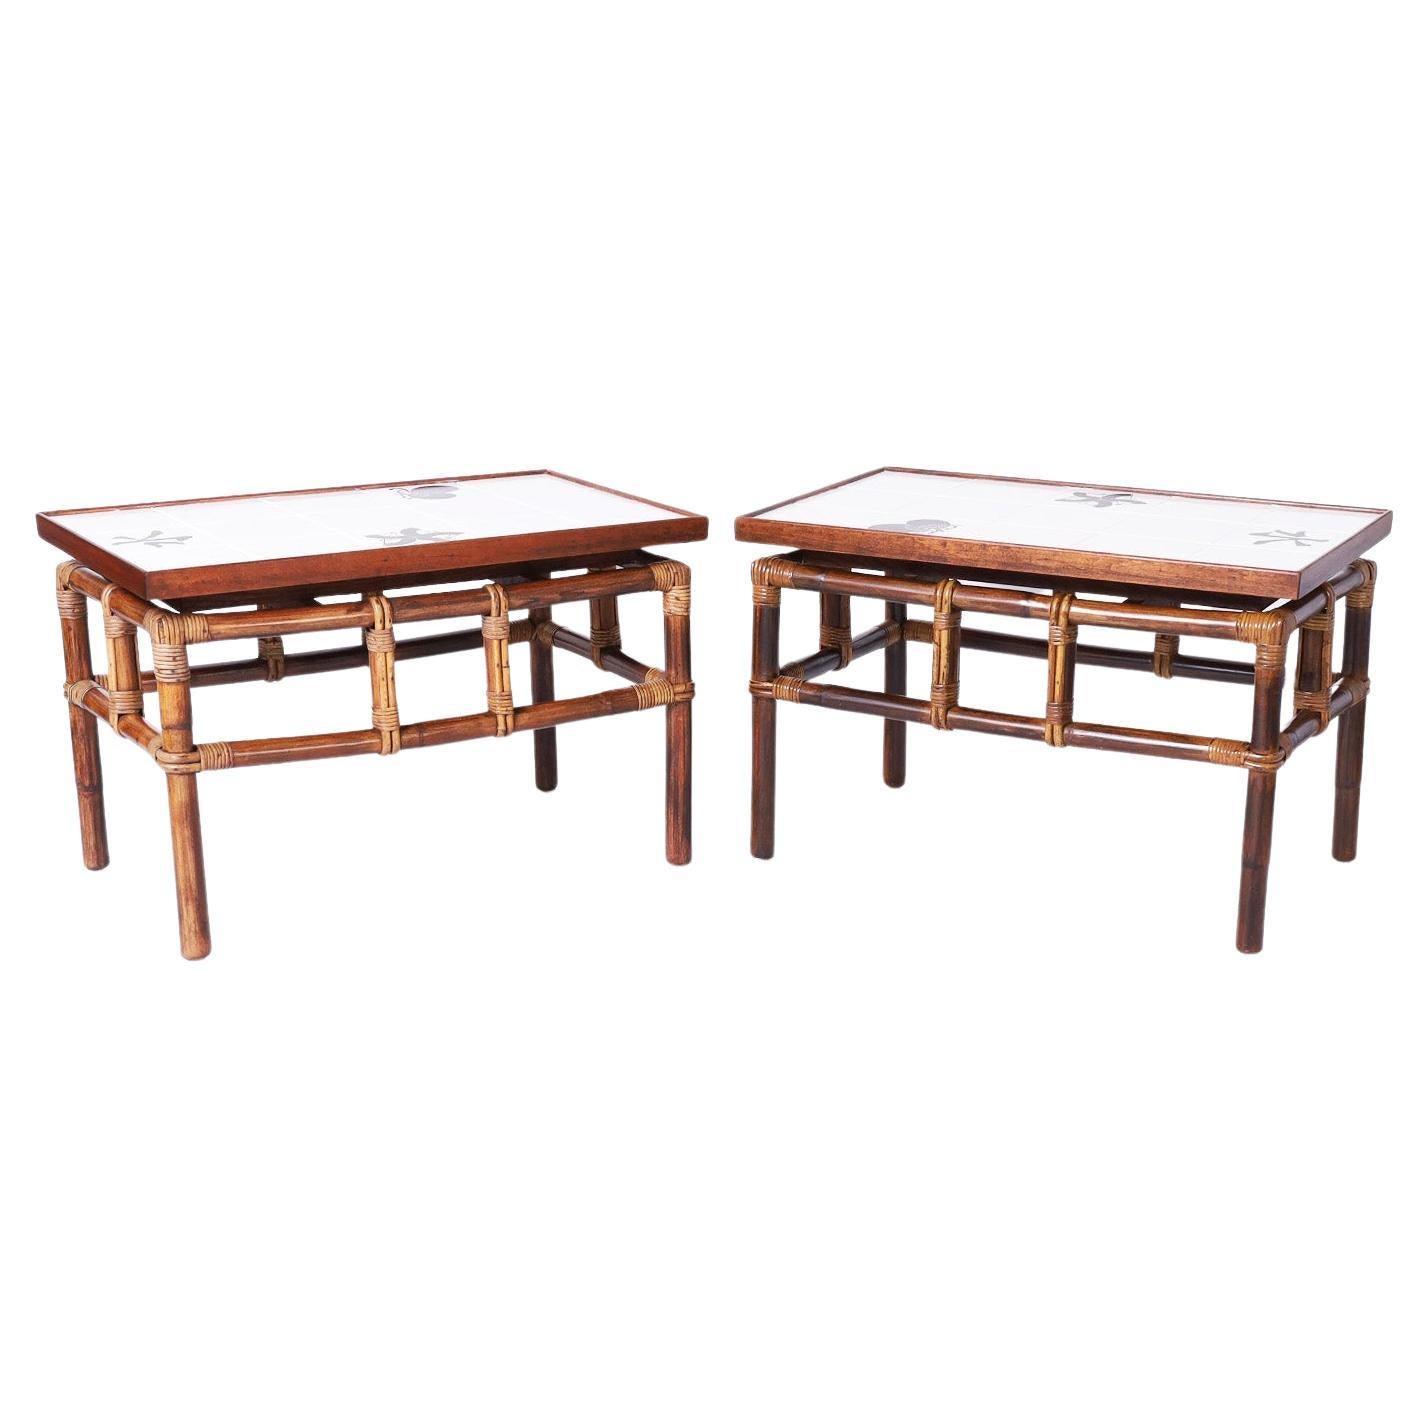 Pair of Bamboo Tile Top Tables or Stands For Sale